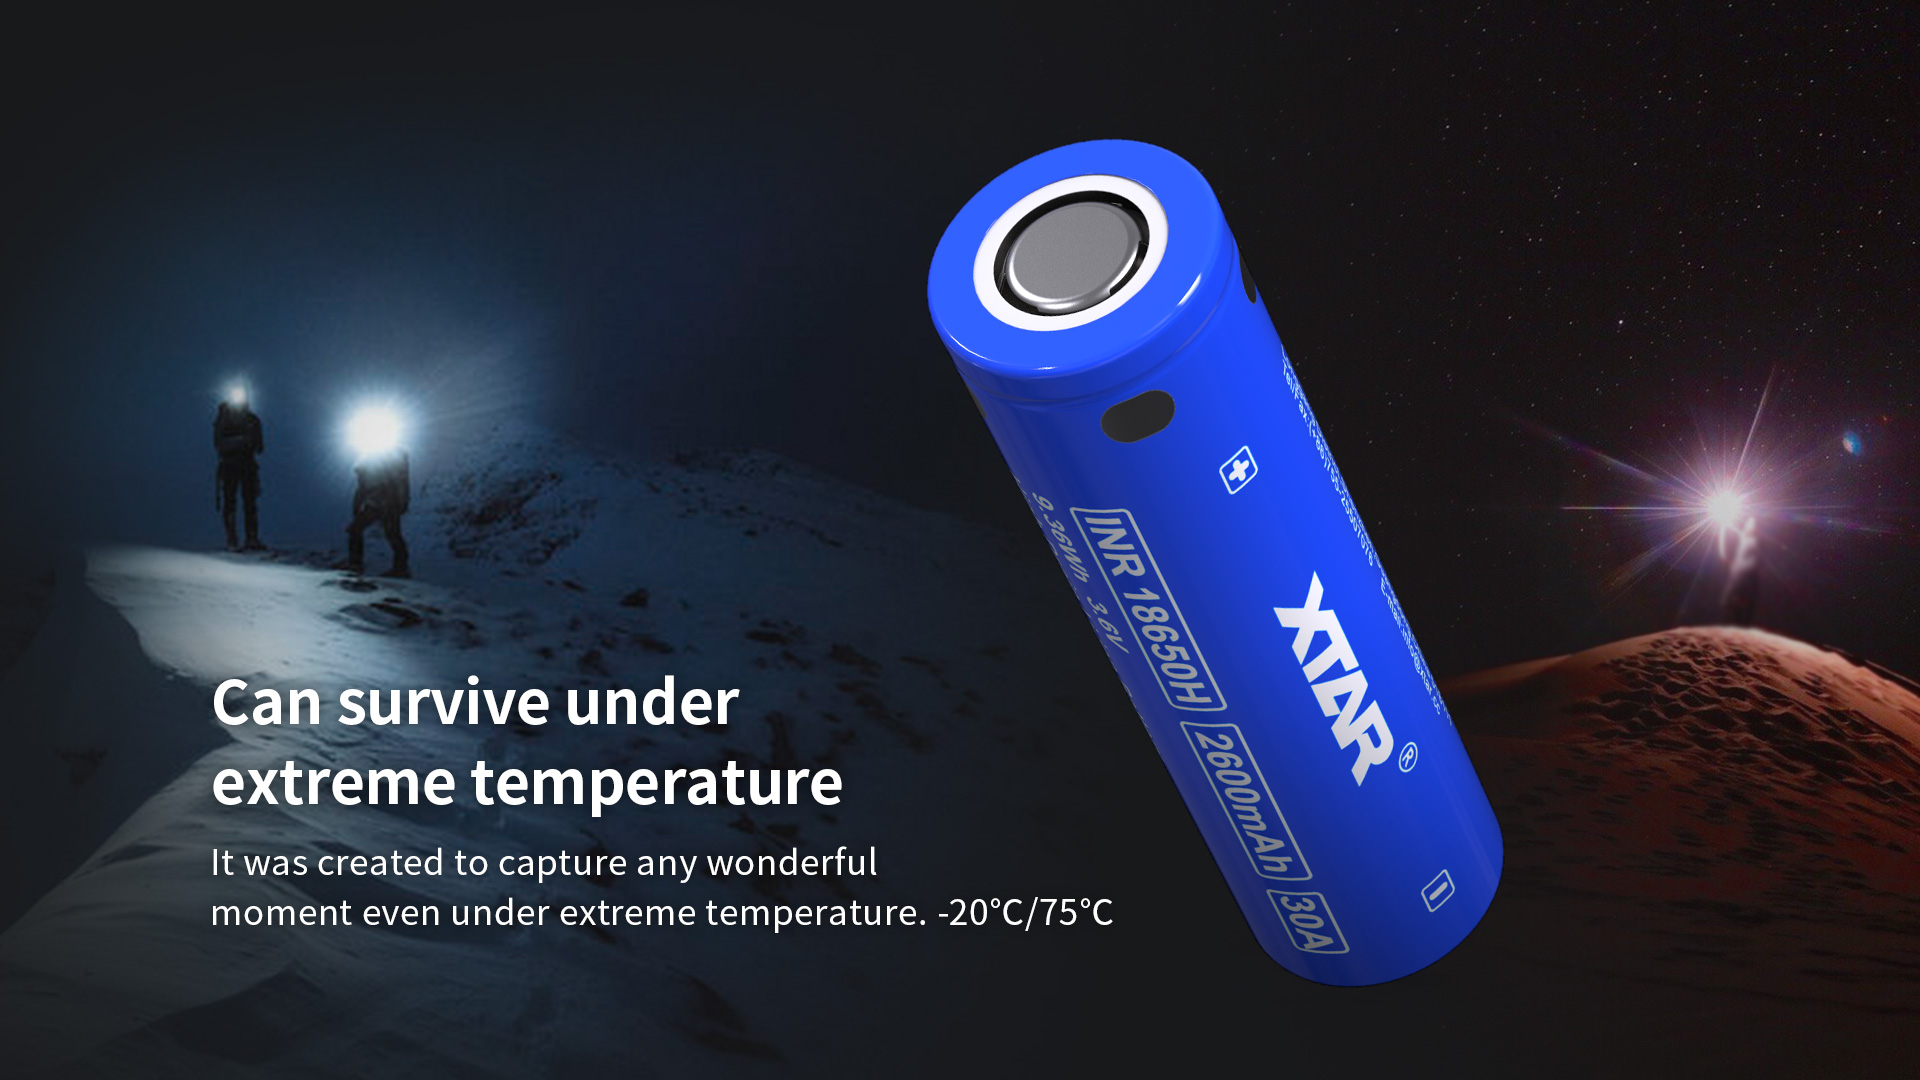 XTAR inr18650 2600mAh cell can survive under extreme temperature.